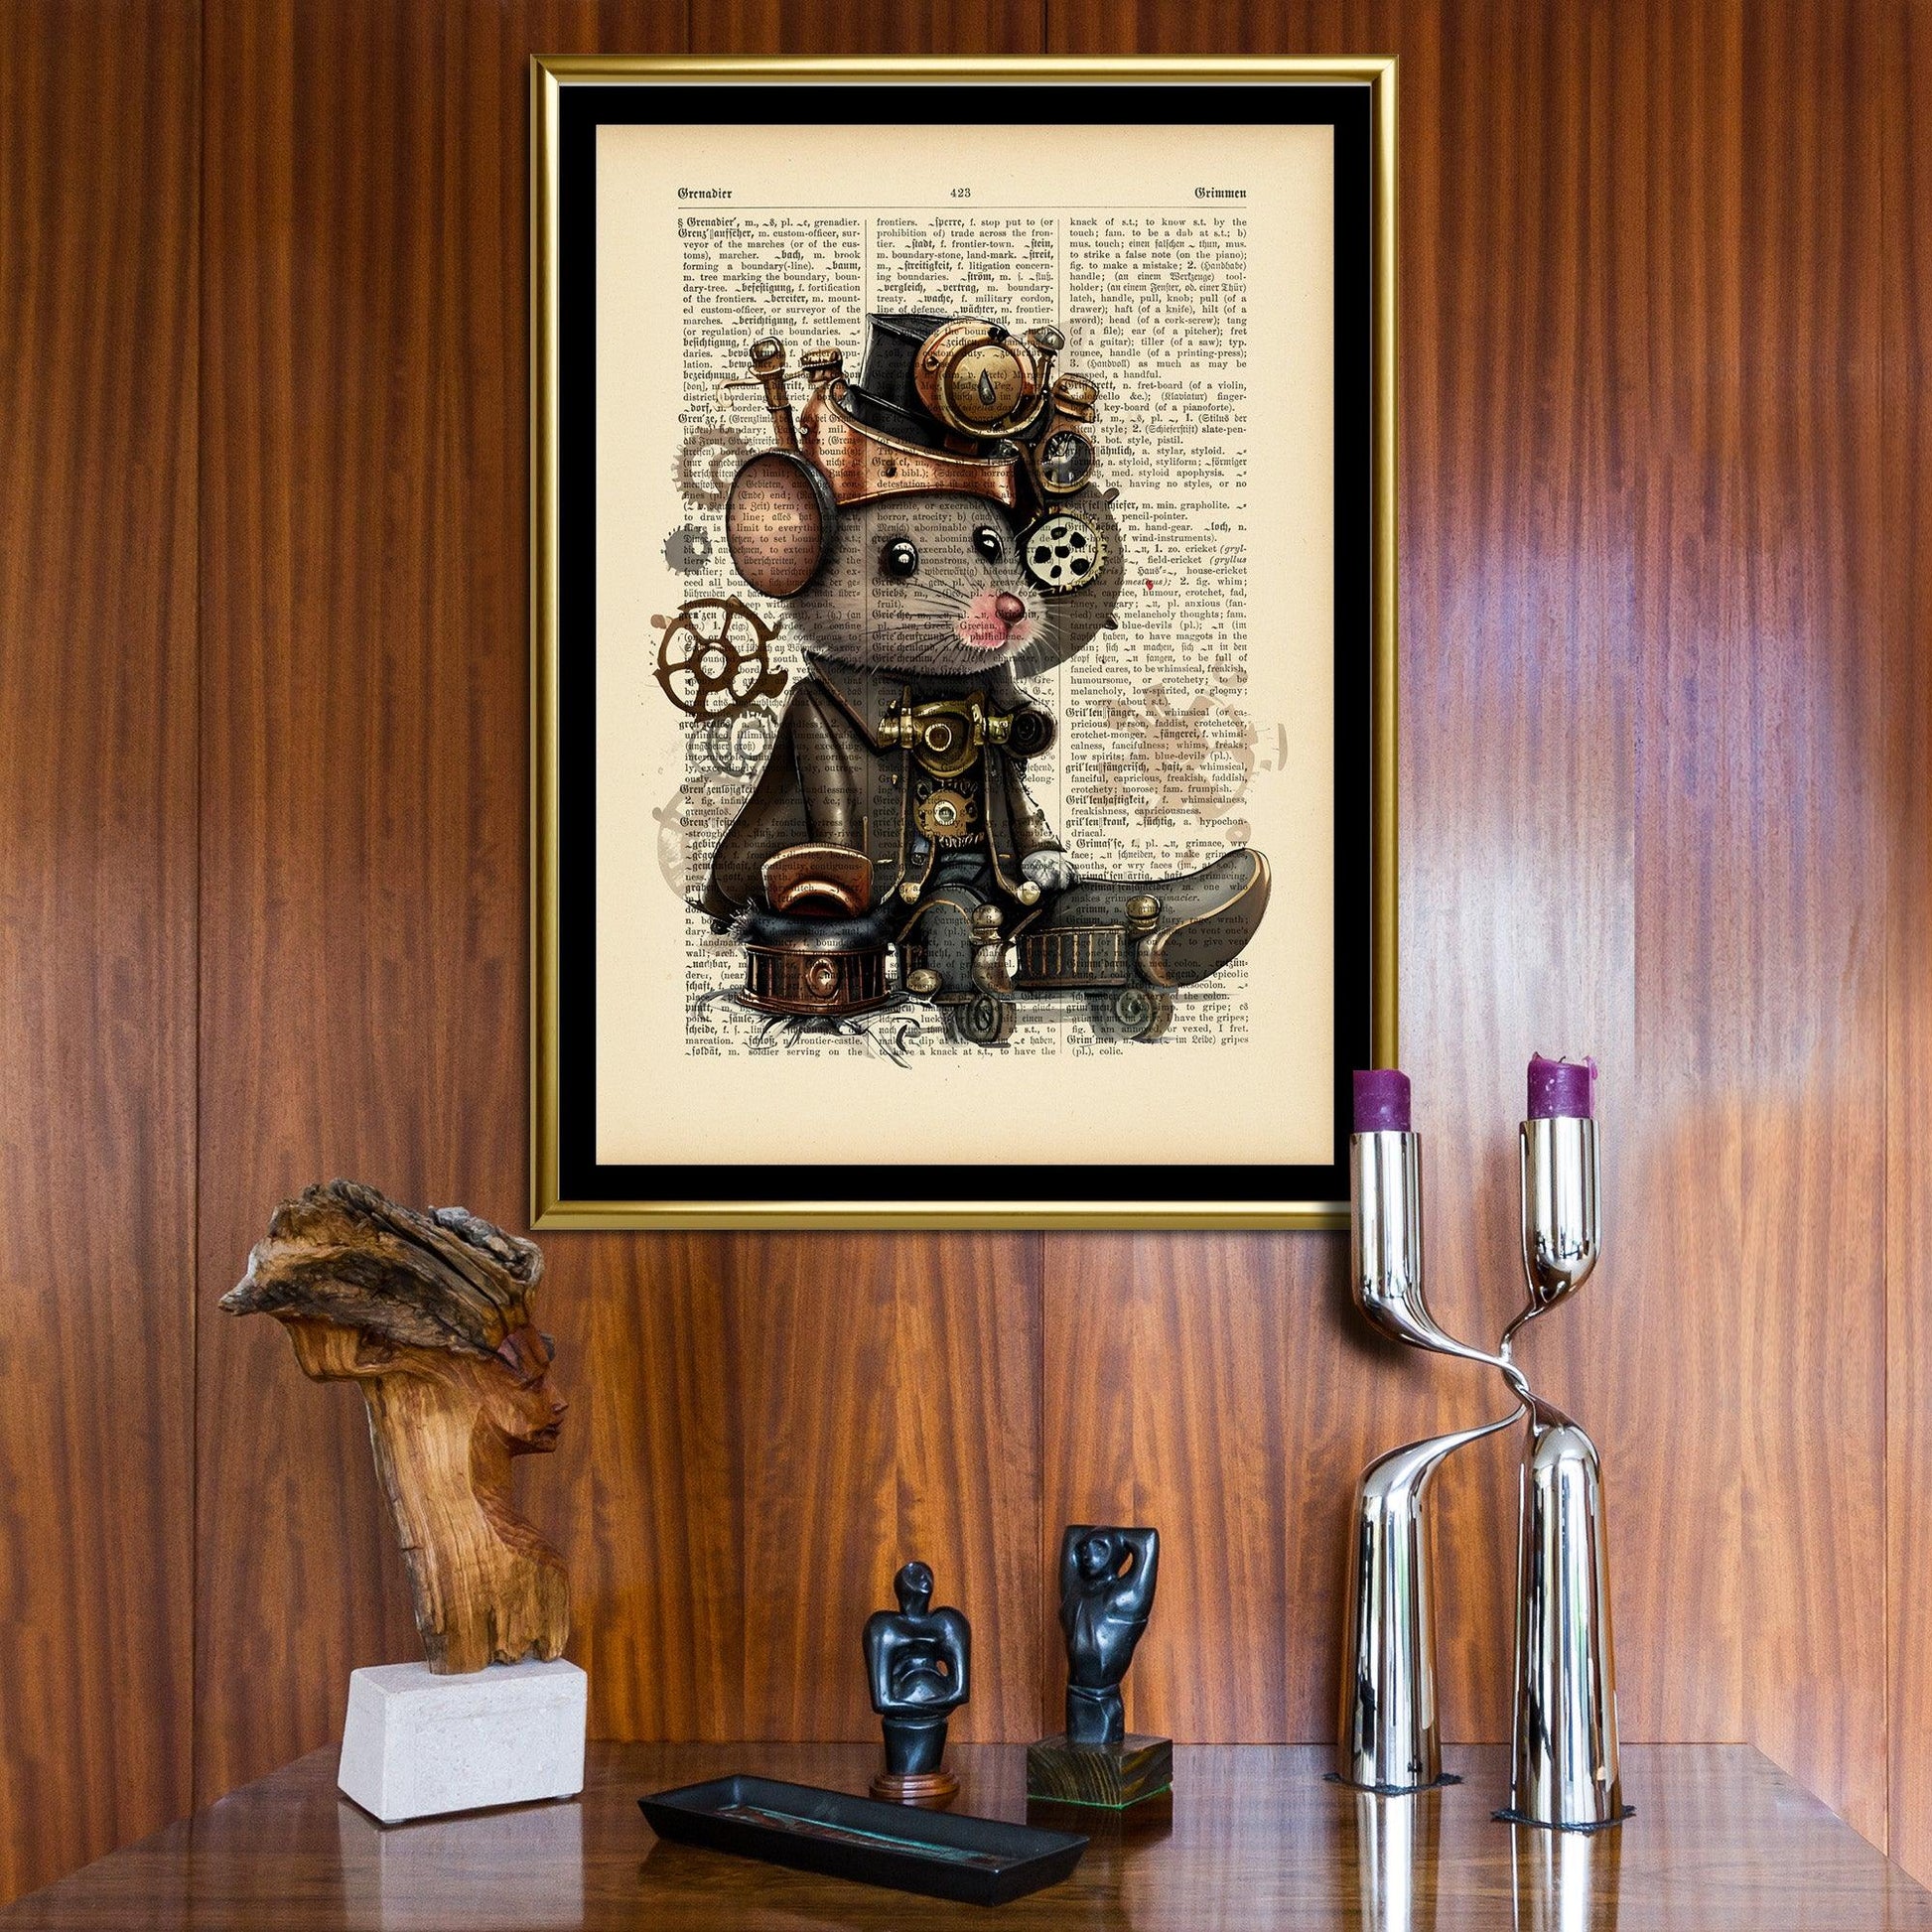 Watchmaker Mouse - Steampunk Dictionary Art Print, Fine Art Print, Funny Animal, Perfect Gift - Steampunk Dictionary Art Print, Fine Art Print, Funny Animal, Perfect Gift - ArtCursor